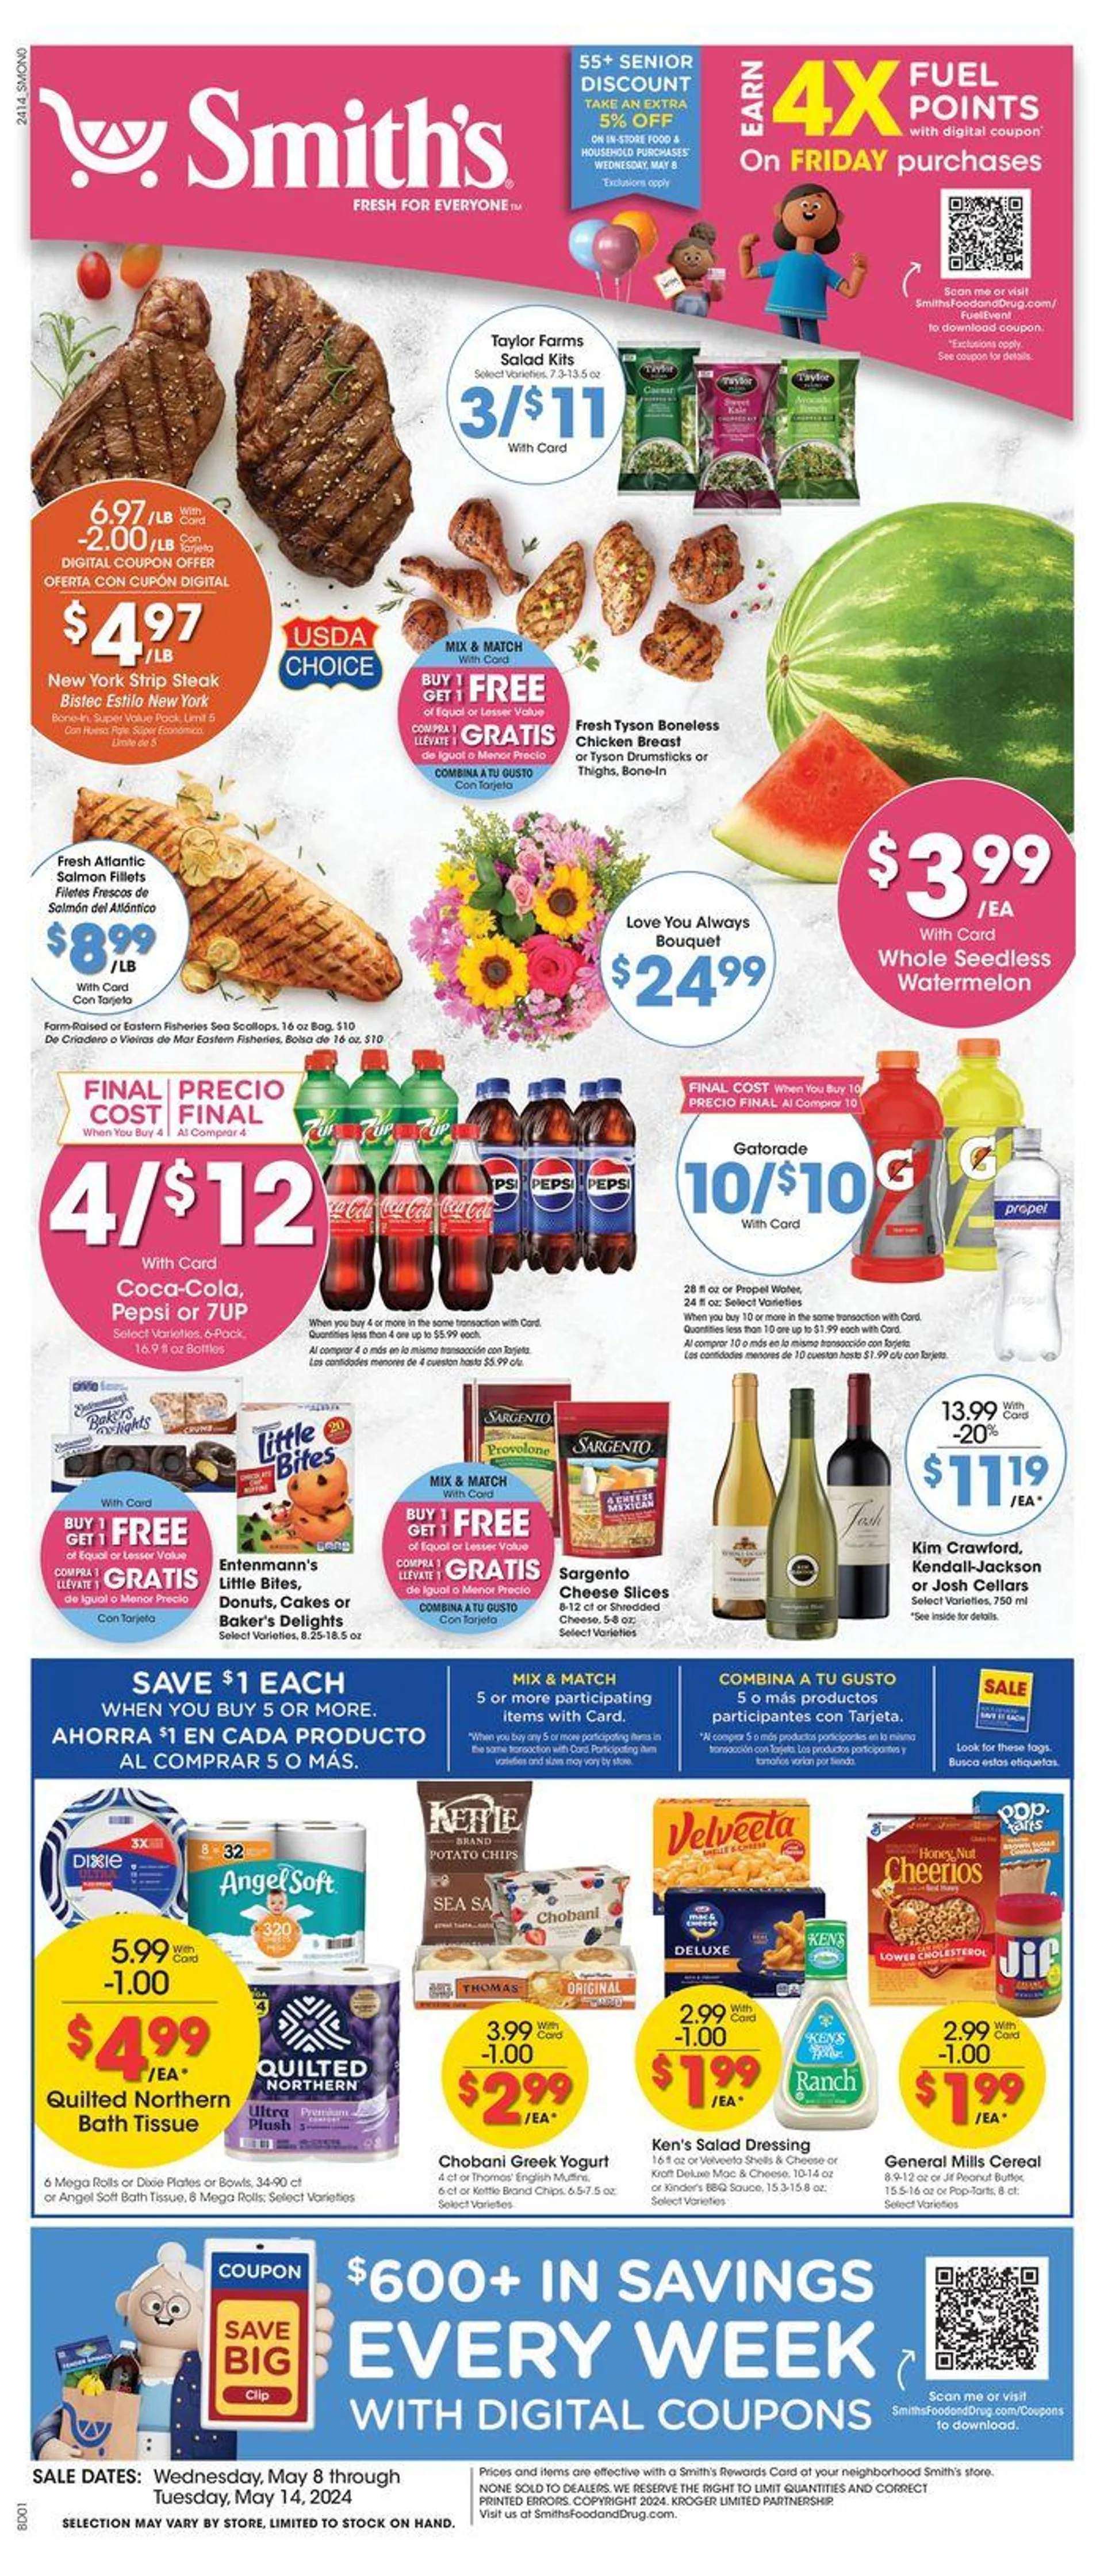 New Weekly Ad - 1